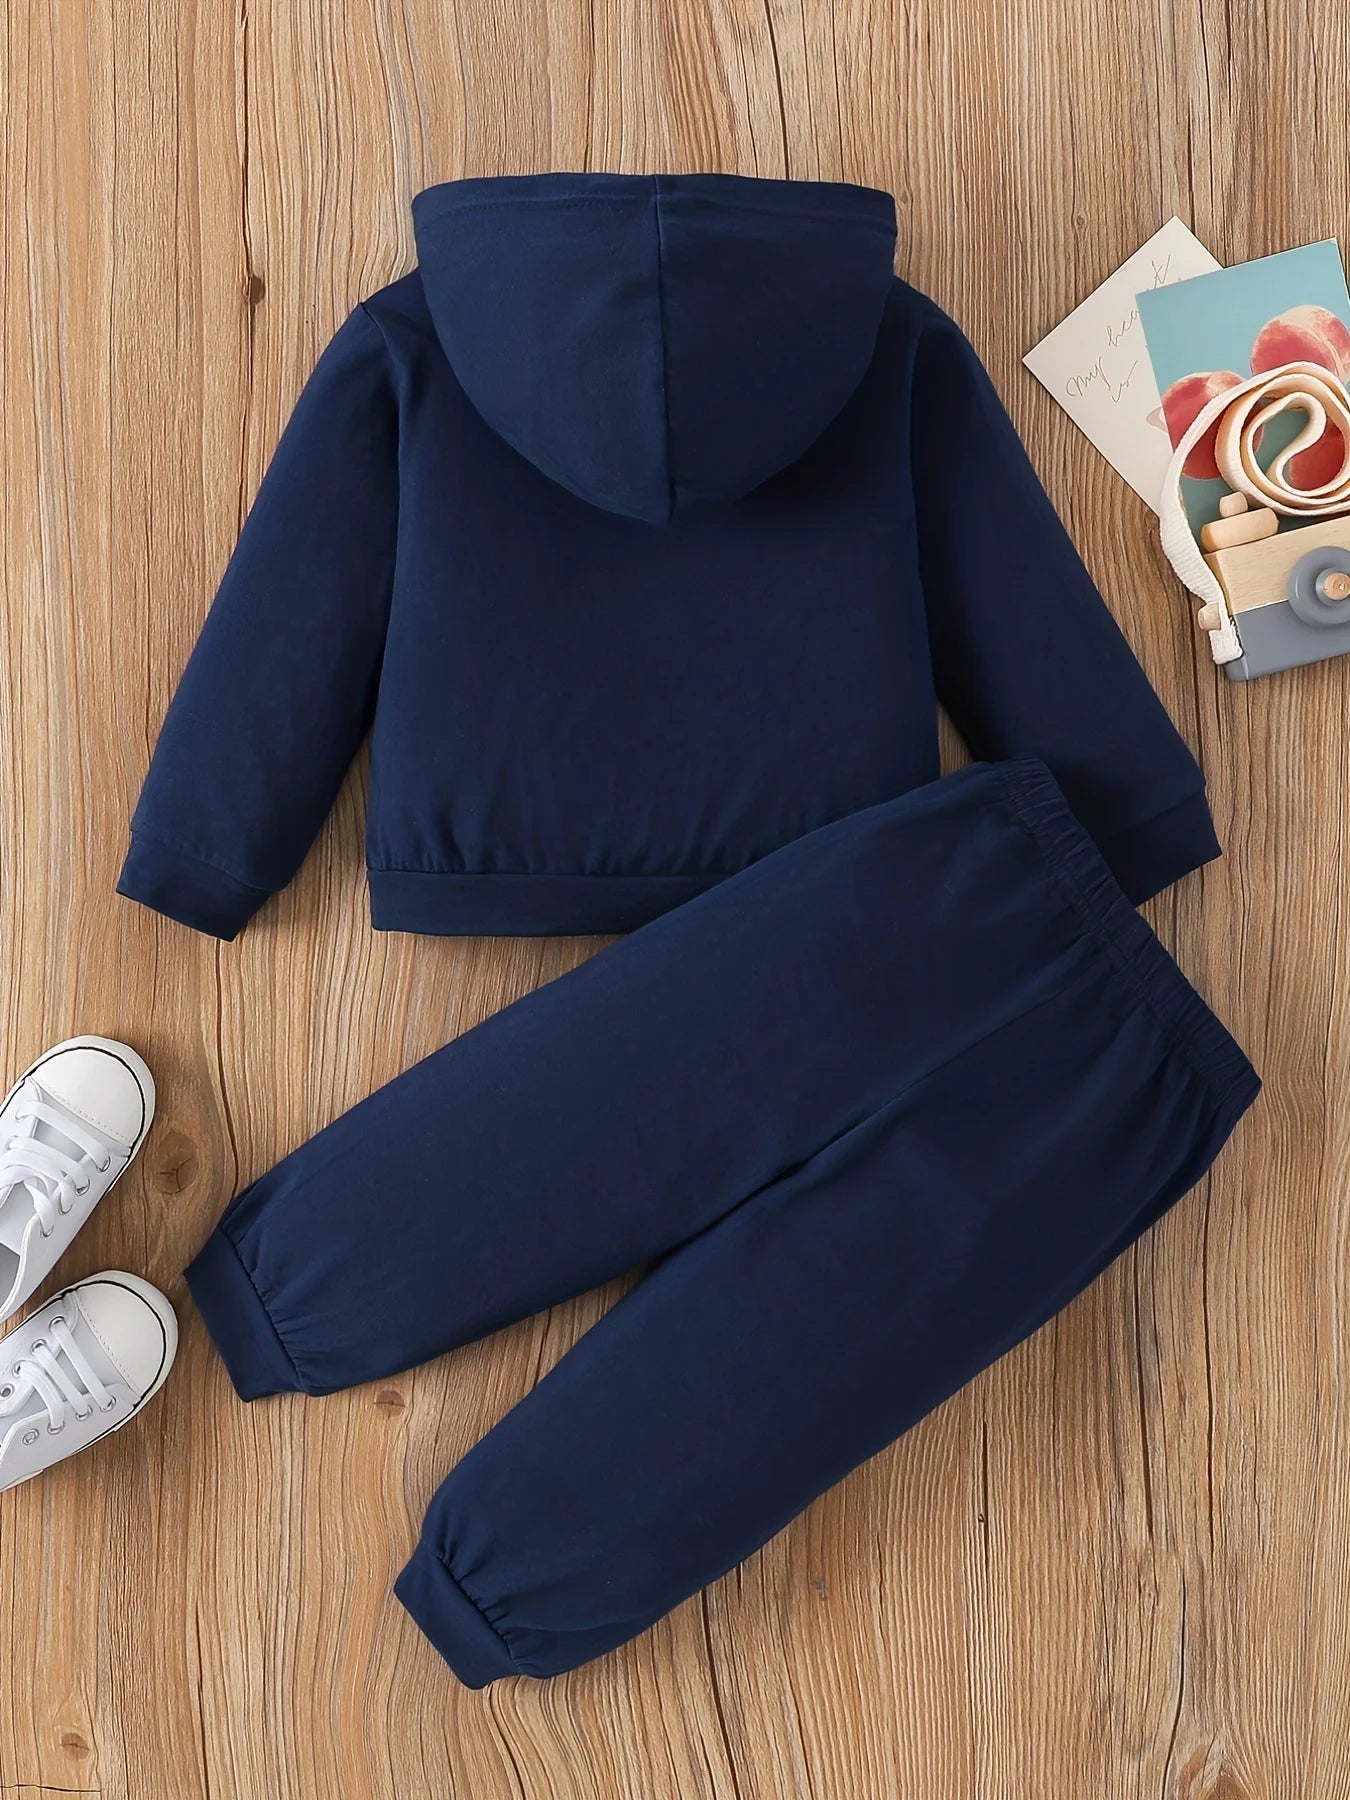 "Royal Blue Toddler Hoodie - Cute and Stylish Casual Cotton Clothing for Newborns and Toddlers in Spring and Autumn"